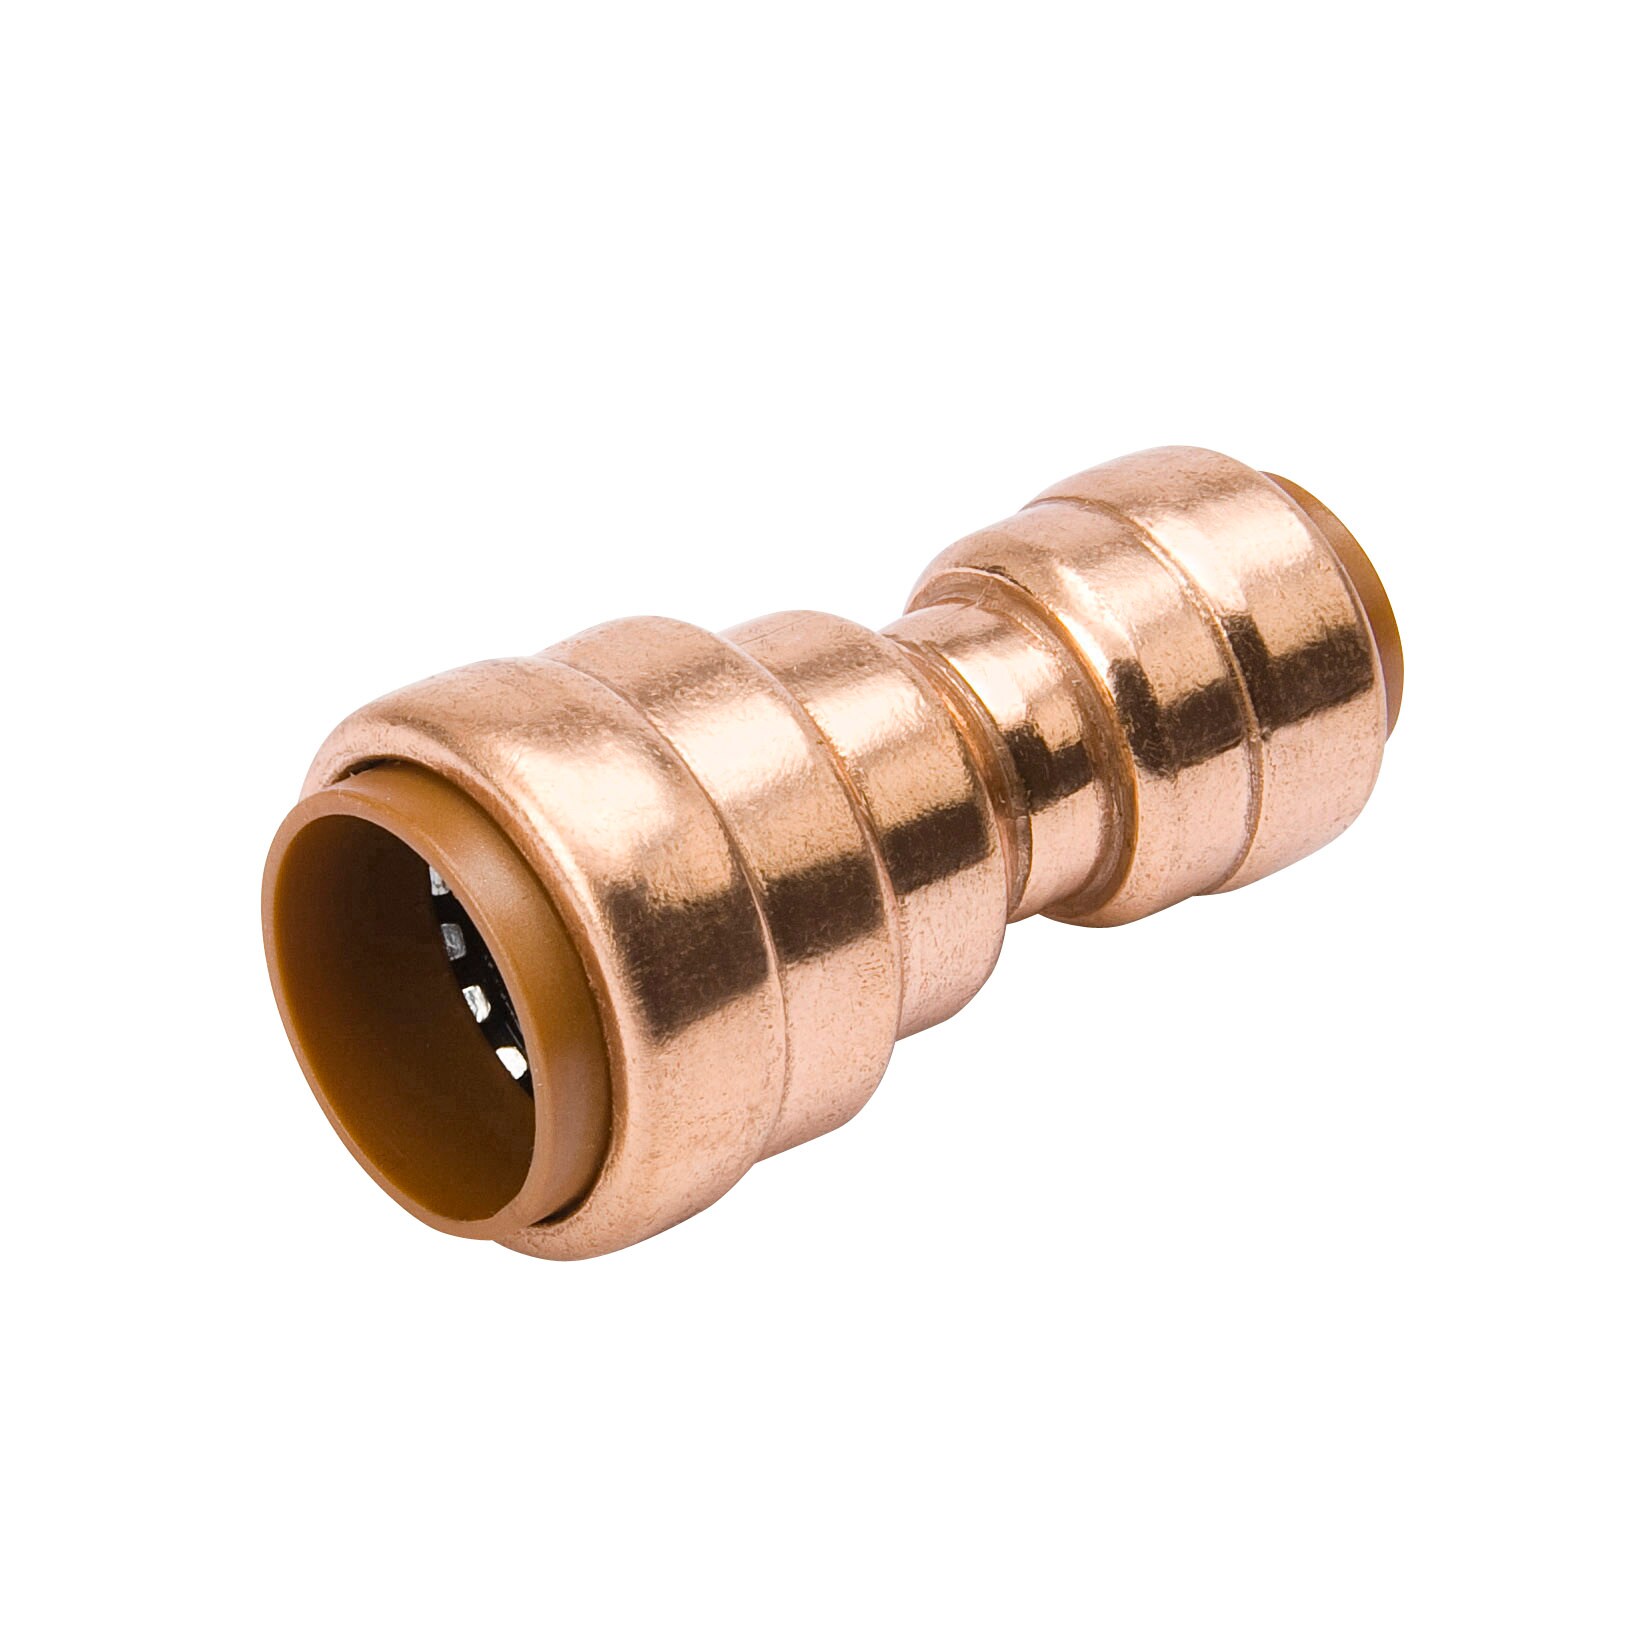 MKC21 NEW MUELLER  3/4" SWT X 1IN NPT COPPER PIPE ADAPTER FITTING 